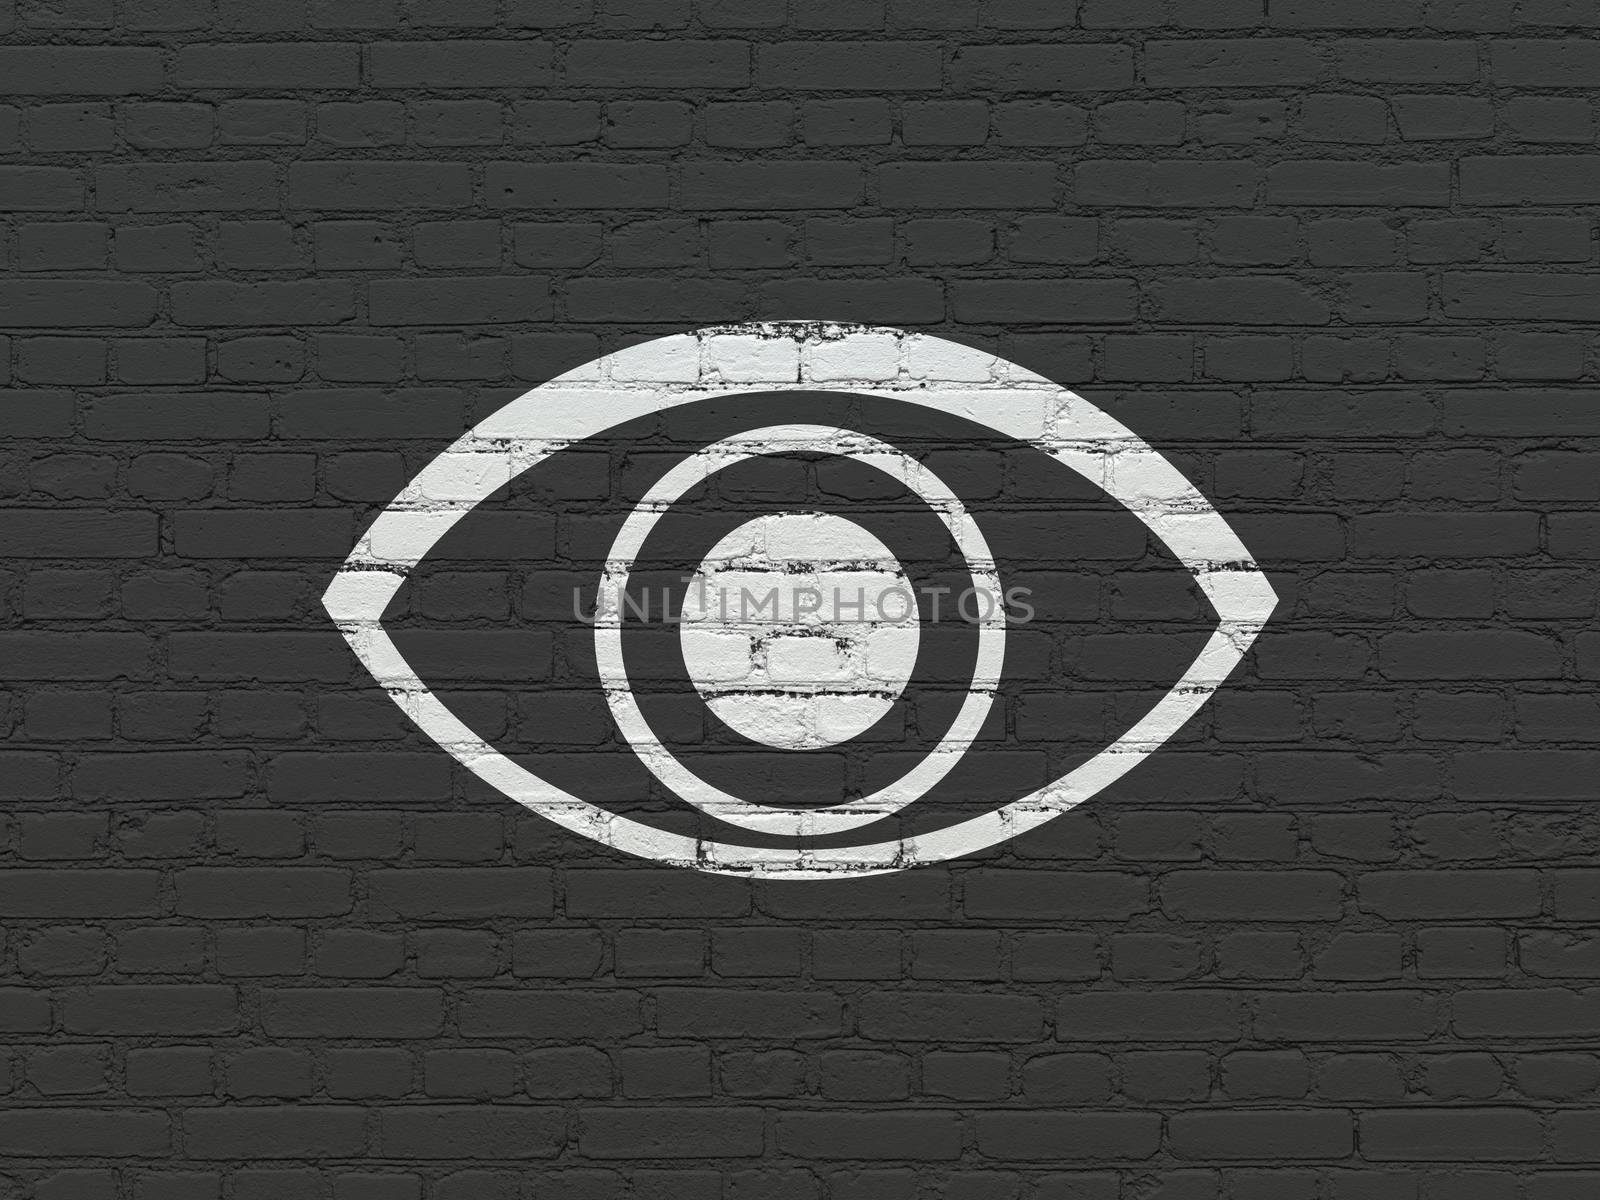 Privacy concept: Painted white Eye icon on Black Brick wall background